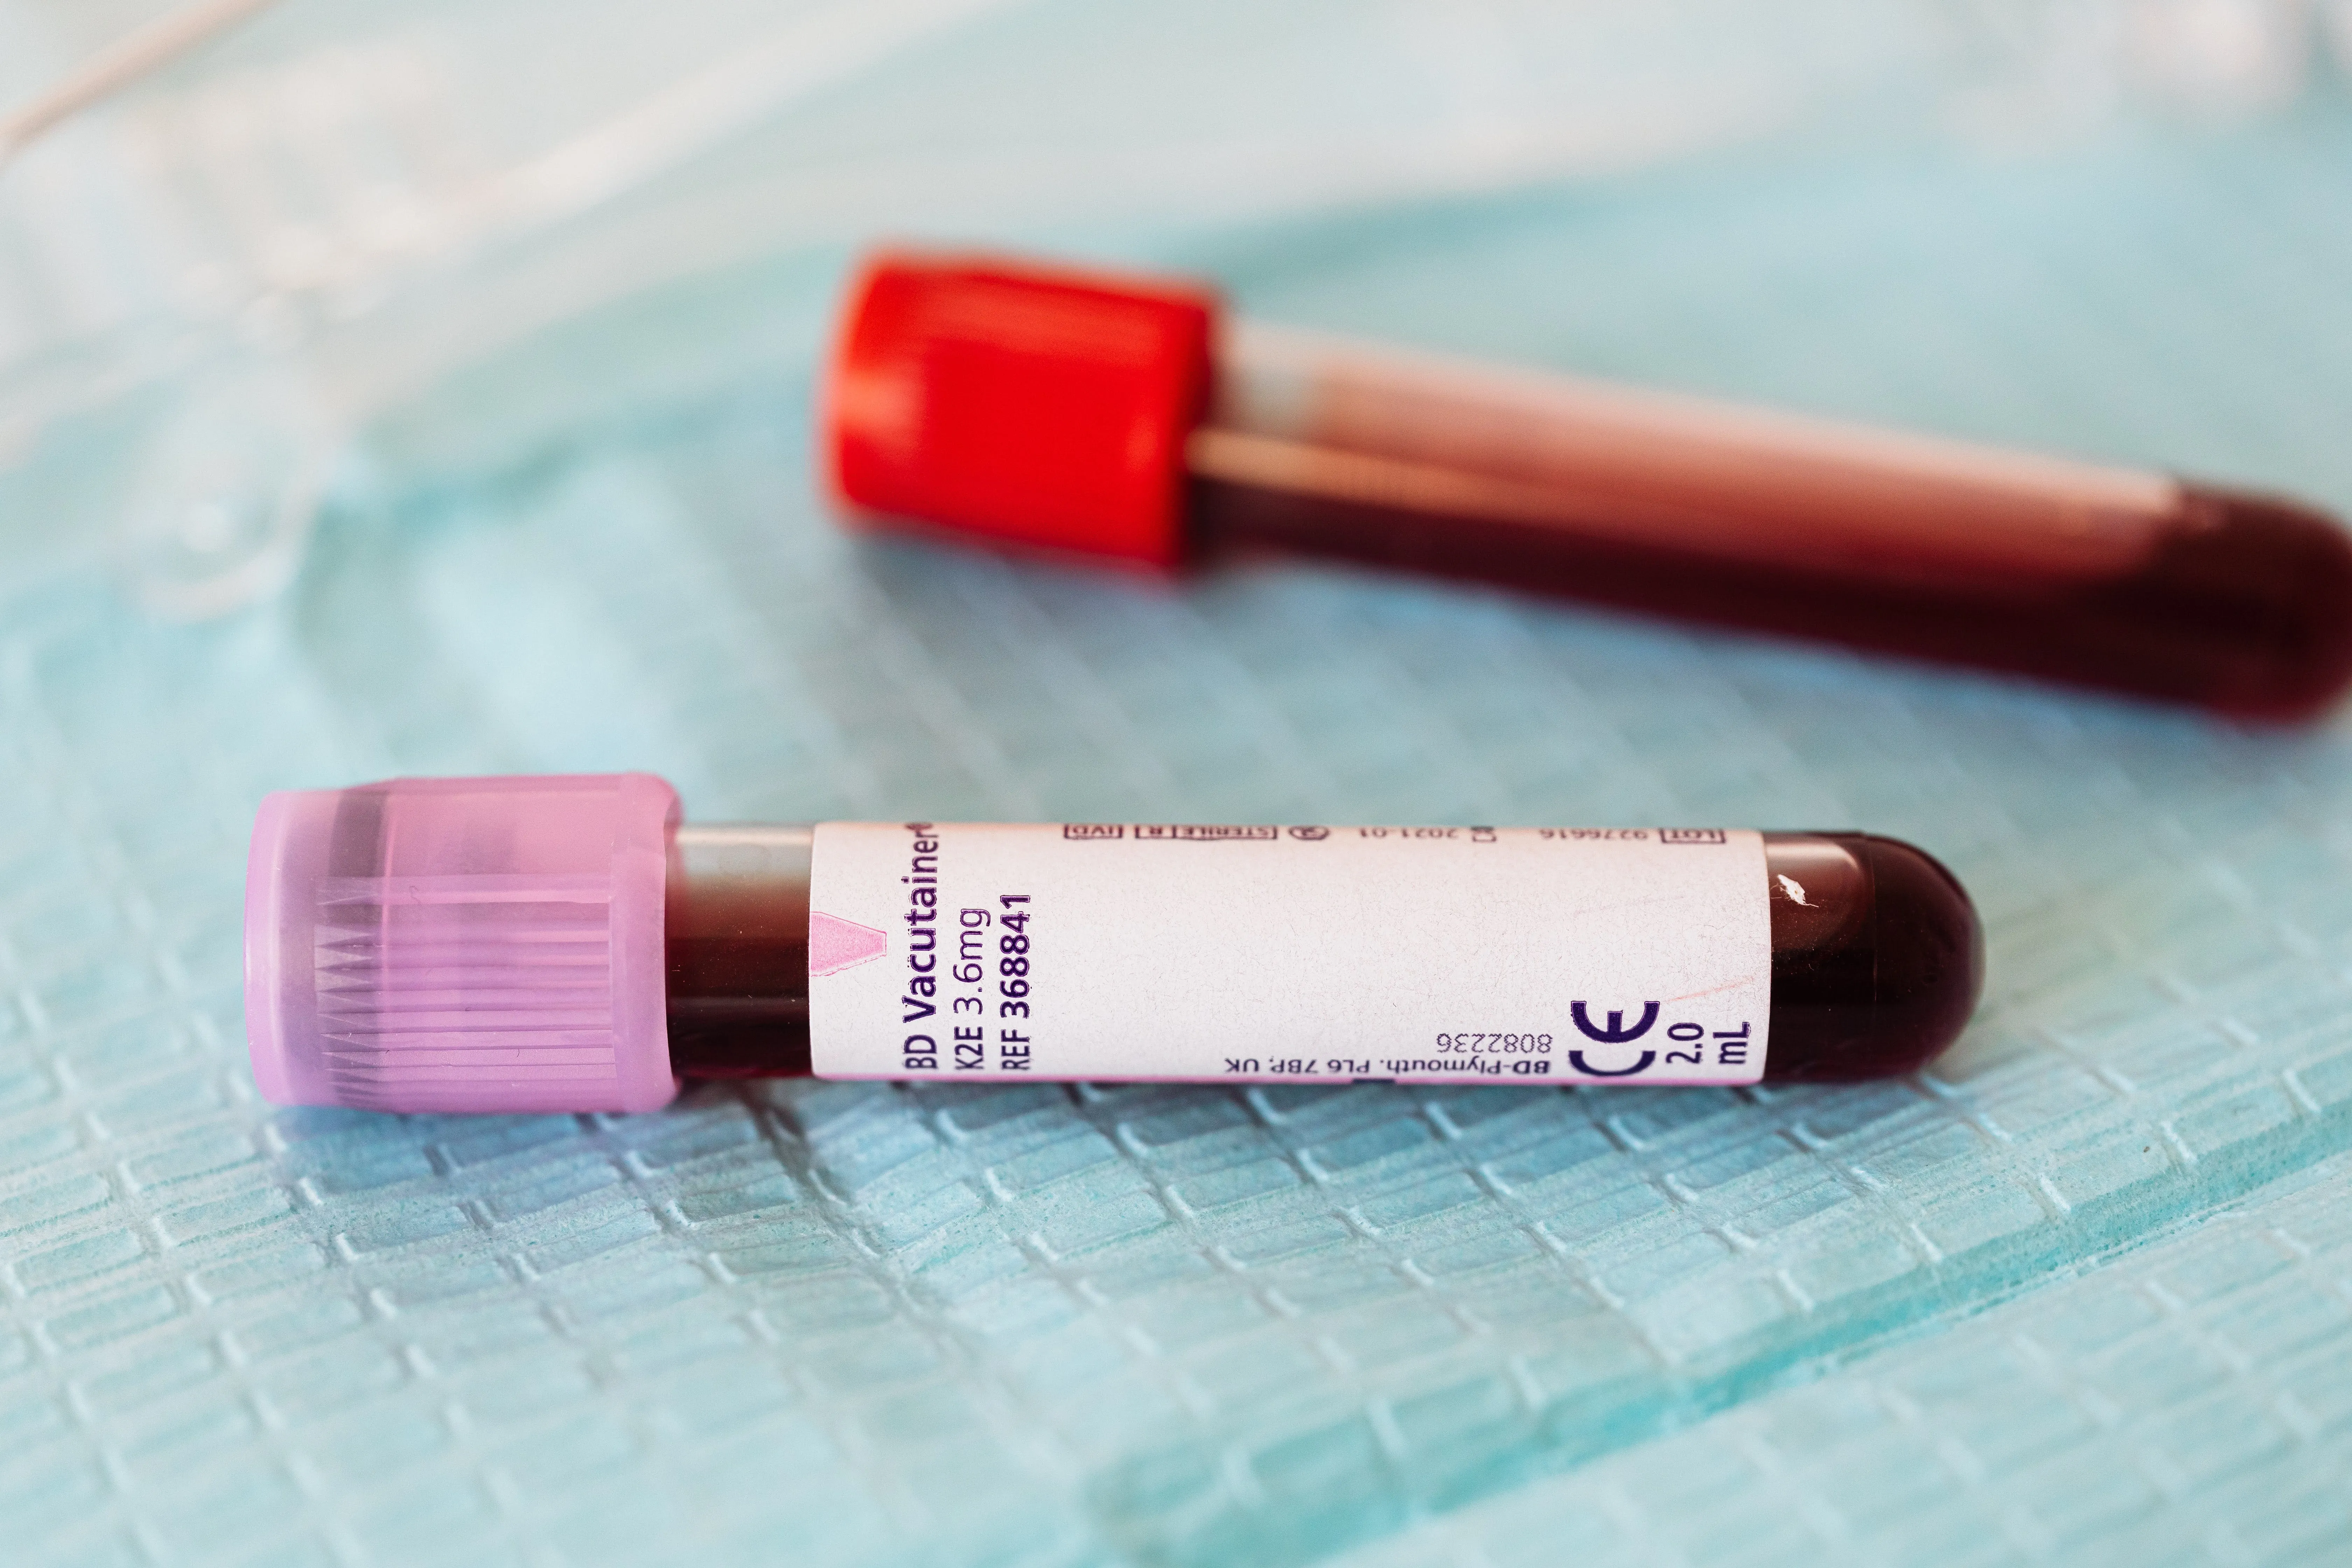 Revolutionary Blood Test Detects Diseases Decades in Advance